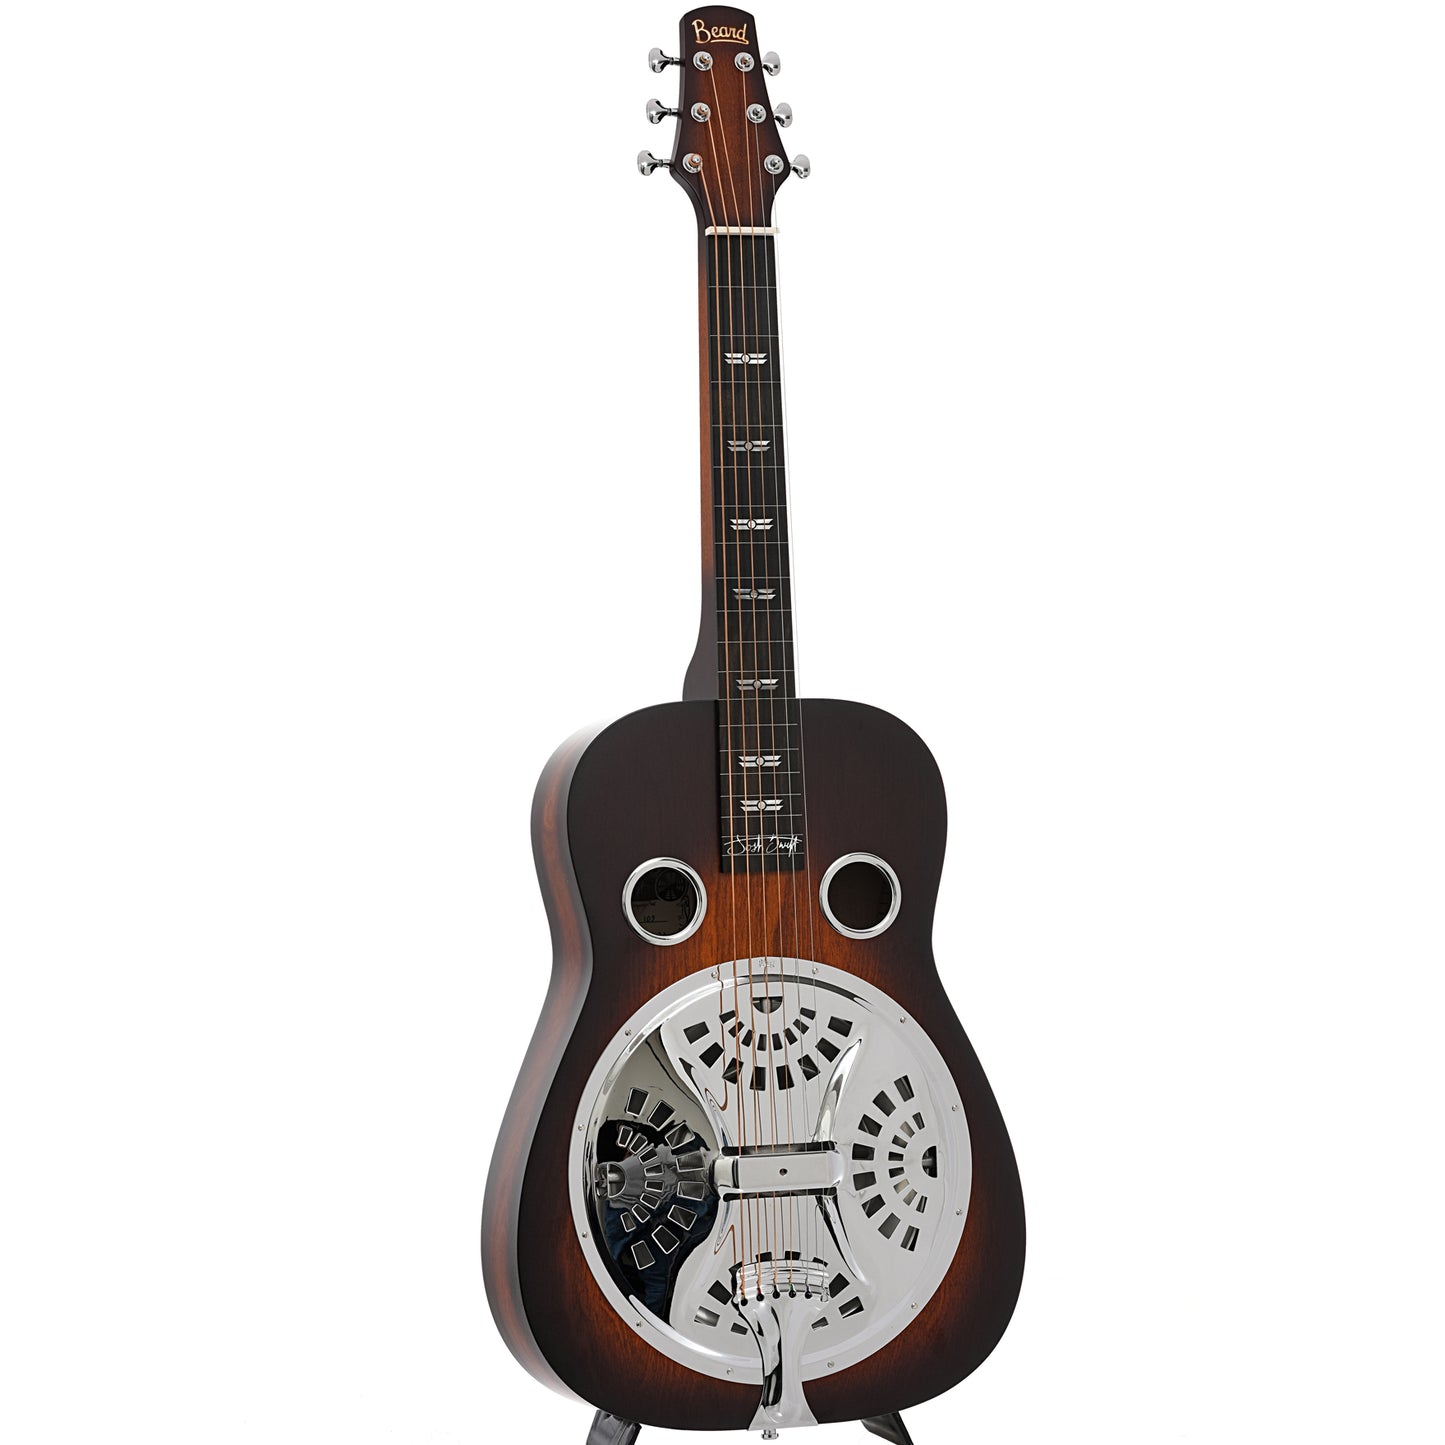 Full front and side of Beard Josh Swift Standard Squareneck Resonator Guitar with Signature Inlays